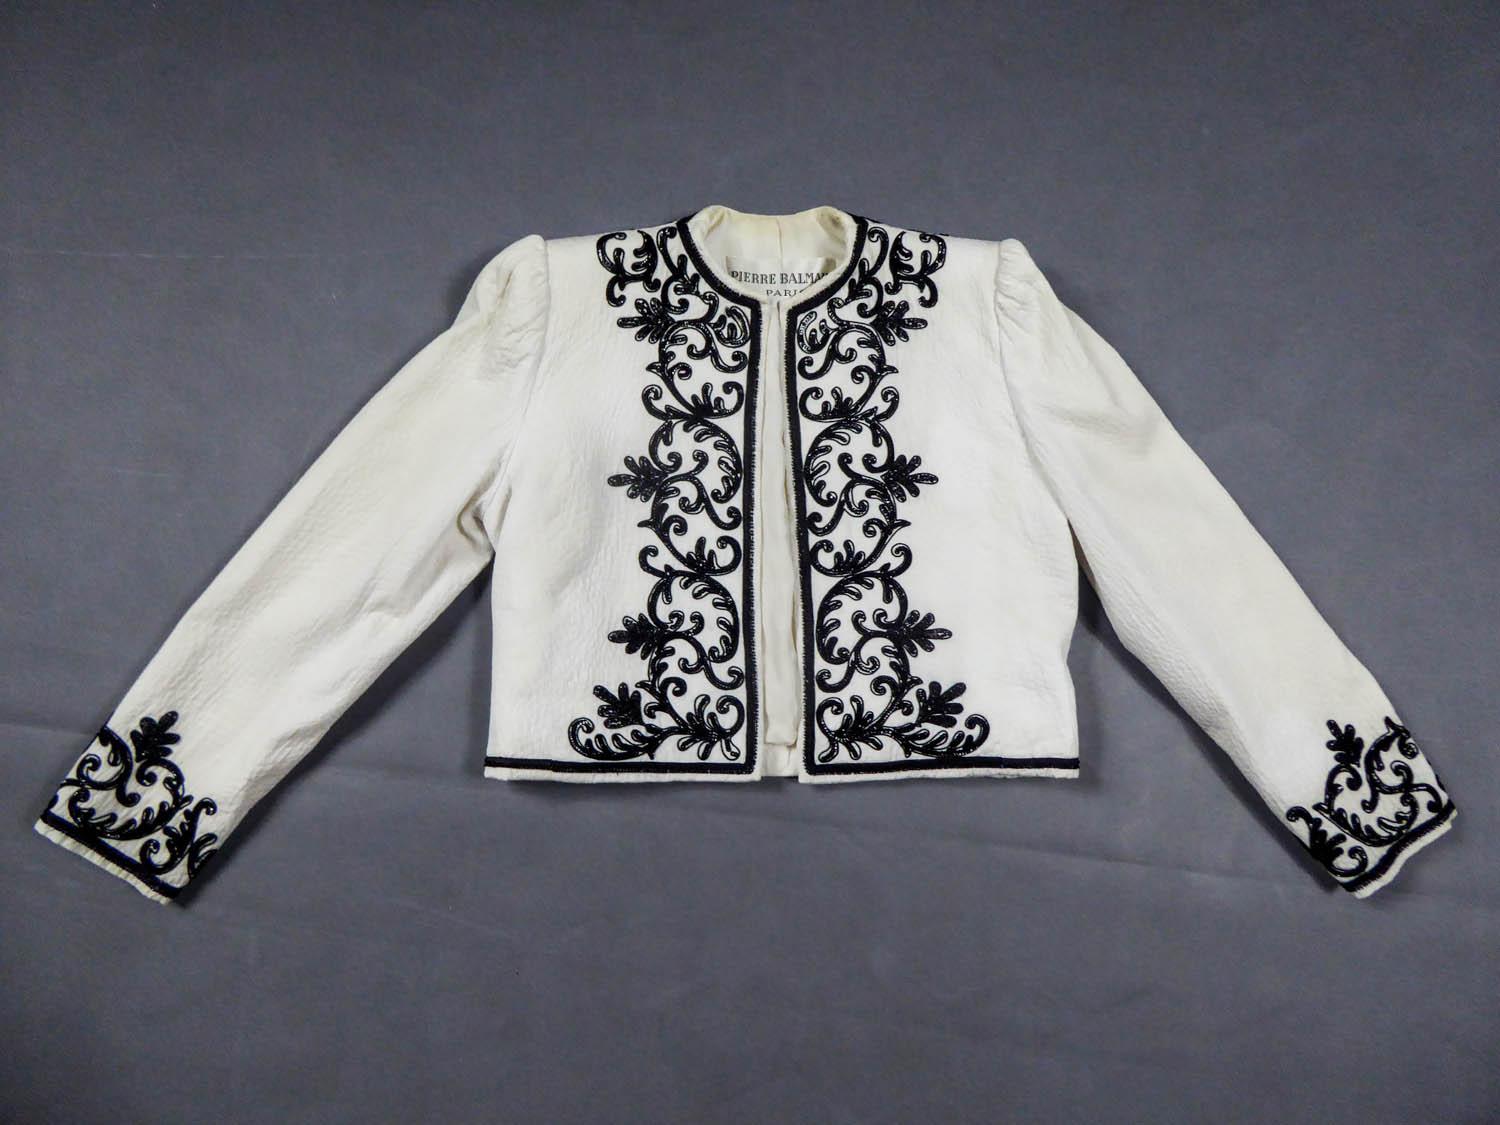 Circa 1955/1965
France

Elegant Pierre Balmain bolero in embroidered white cotton piqué with round collar and small epaulets, dating from the late 1950s. On the edge of jacket and wrists, very fine work of lying black sequins embroideries set with